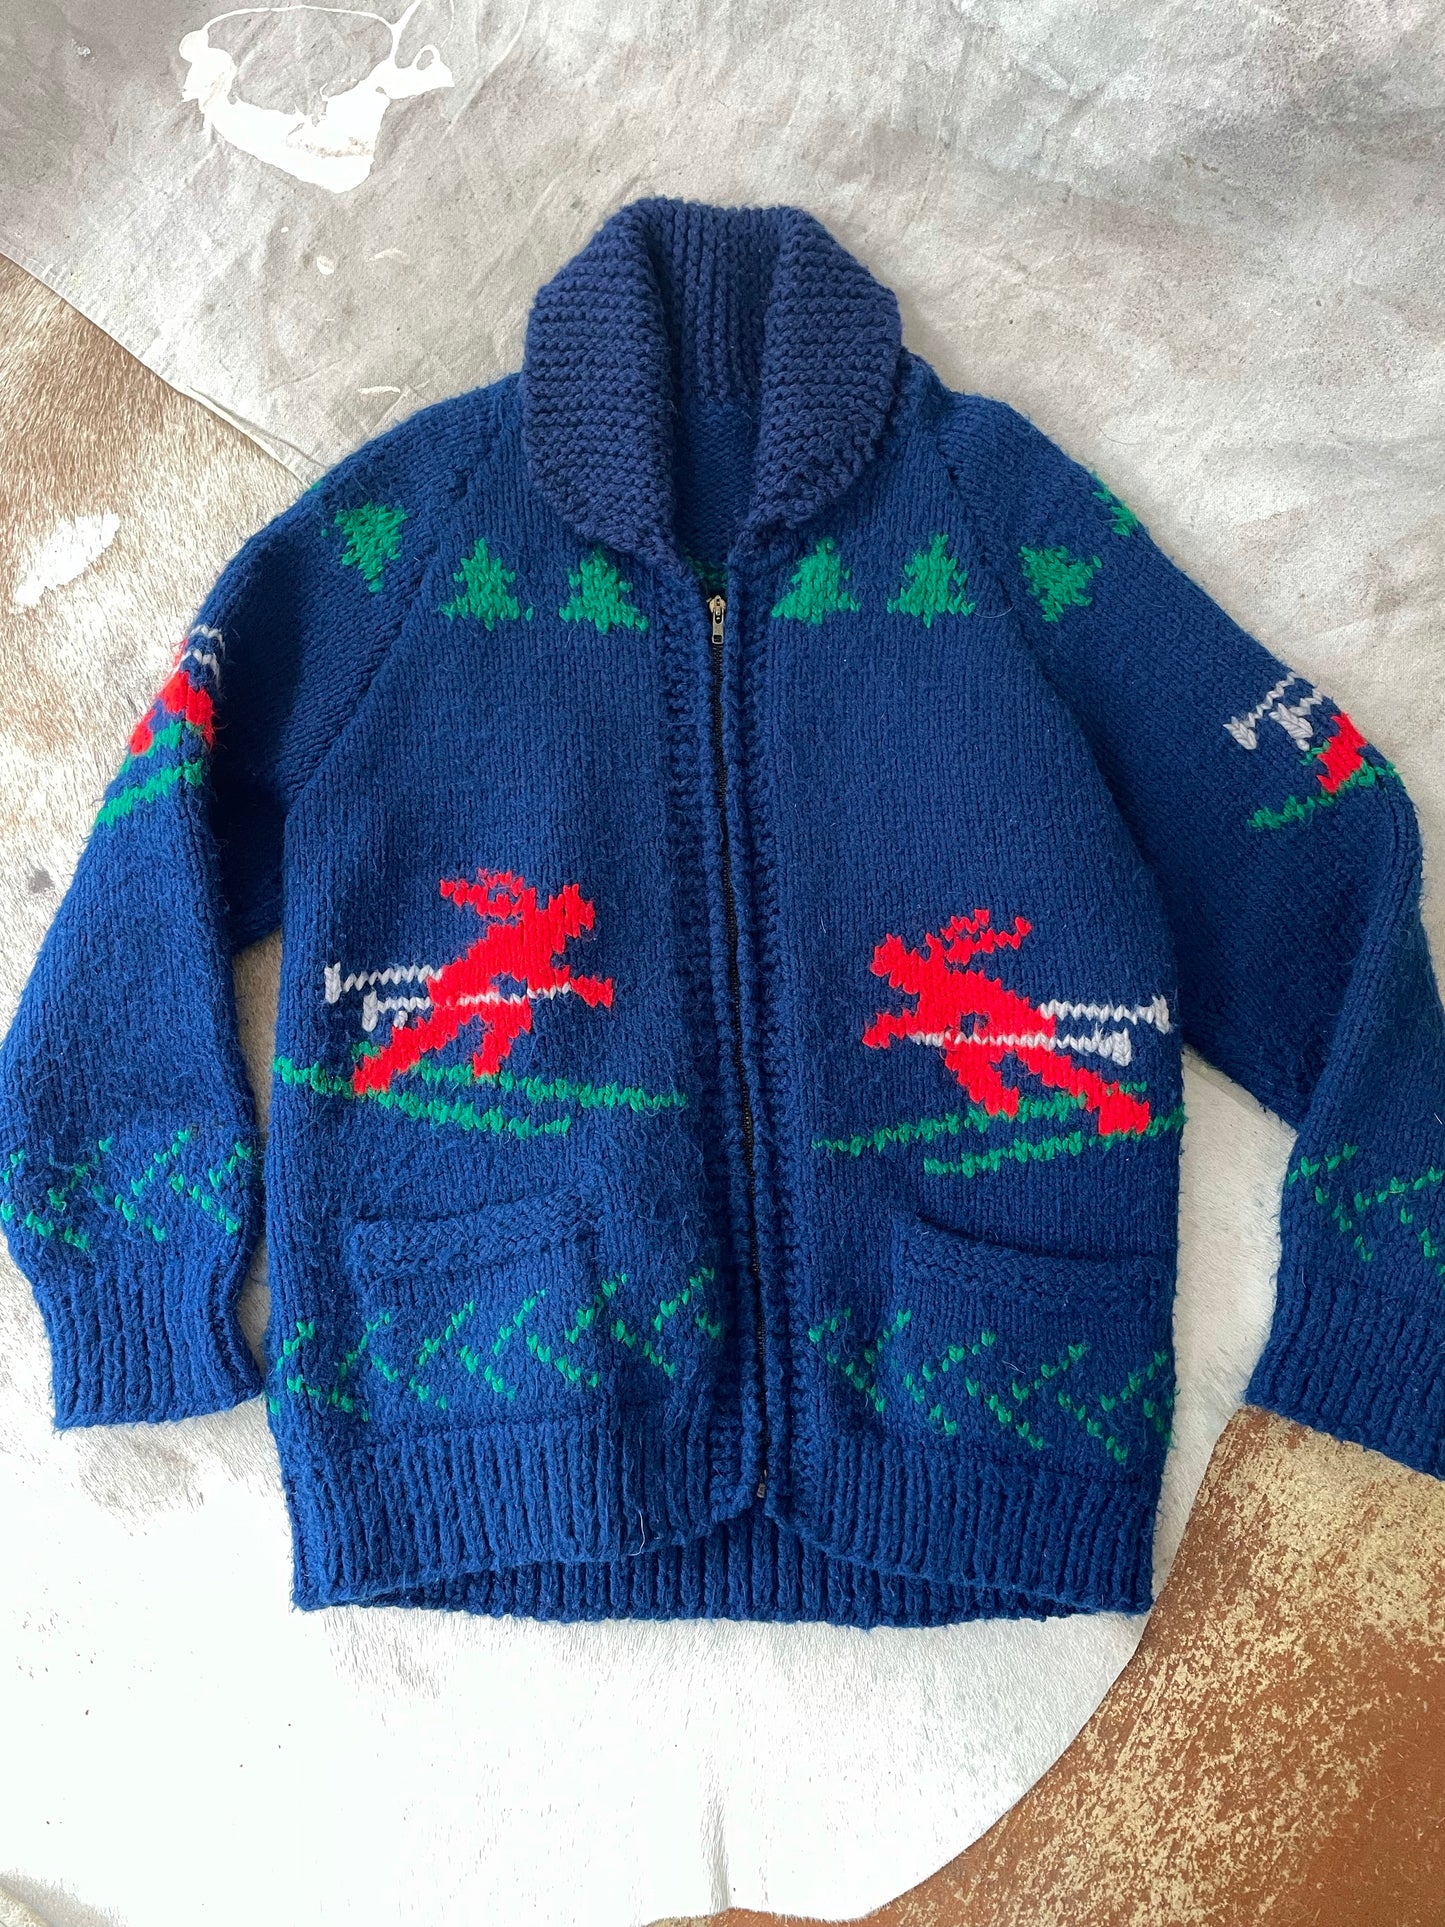 Mary Maxim “The Skiers” Hand Knit Sweater